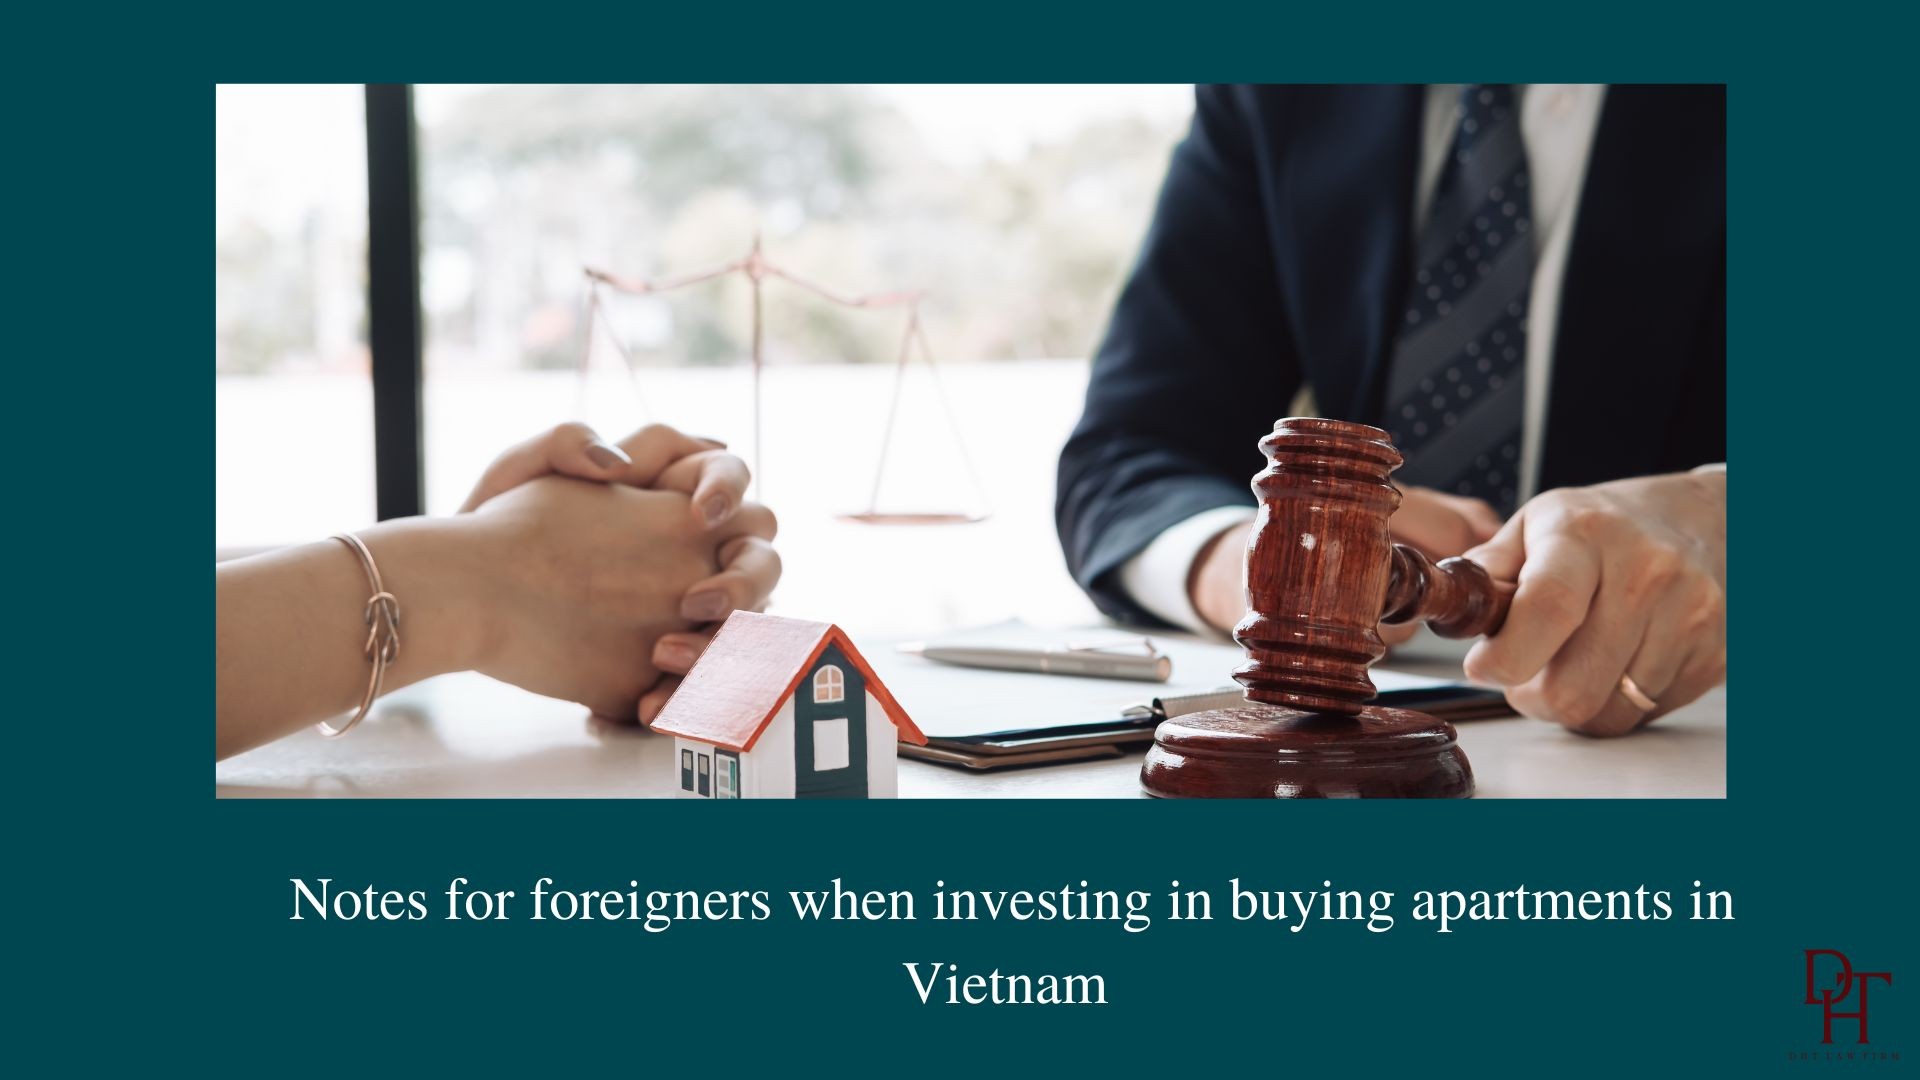 NOTES FOR FOREIGNERS WHEN INVESTMENT BUY APARTMENT IN VIETNAM